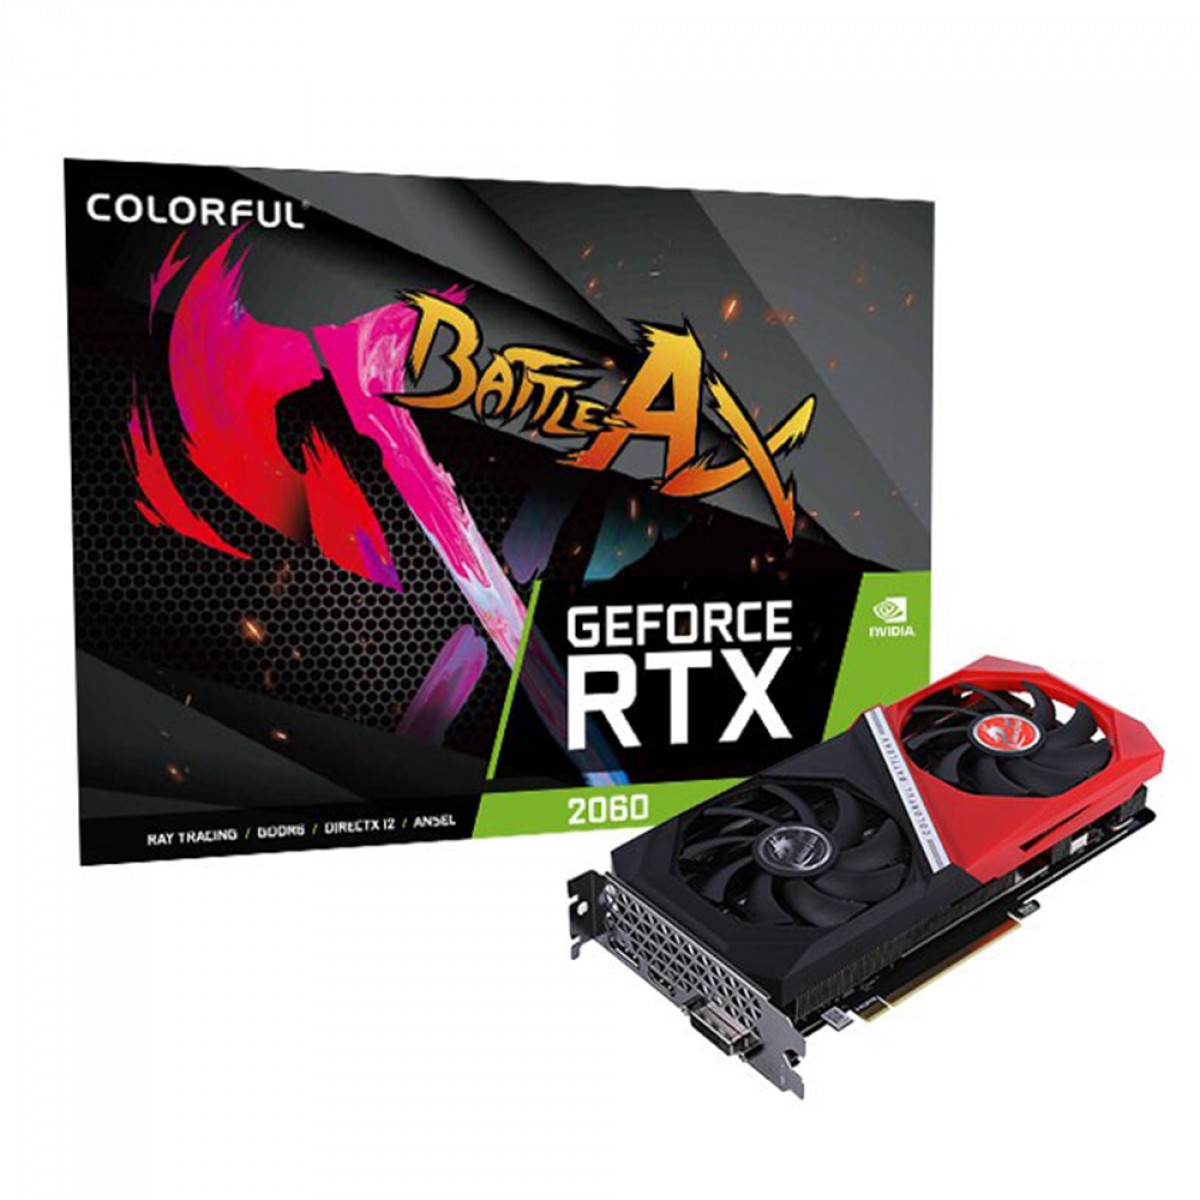 Placa De Vídeo Colorful NVIDIA GeForce RTX 2060 NB DUO, 12GB, GDDR6, DLSS, Ray Tracing